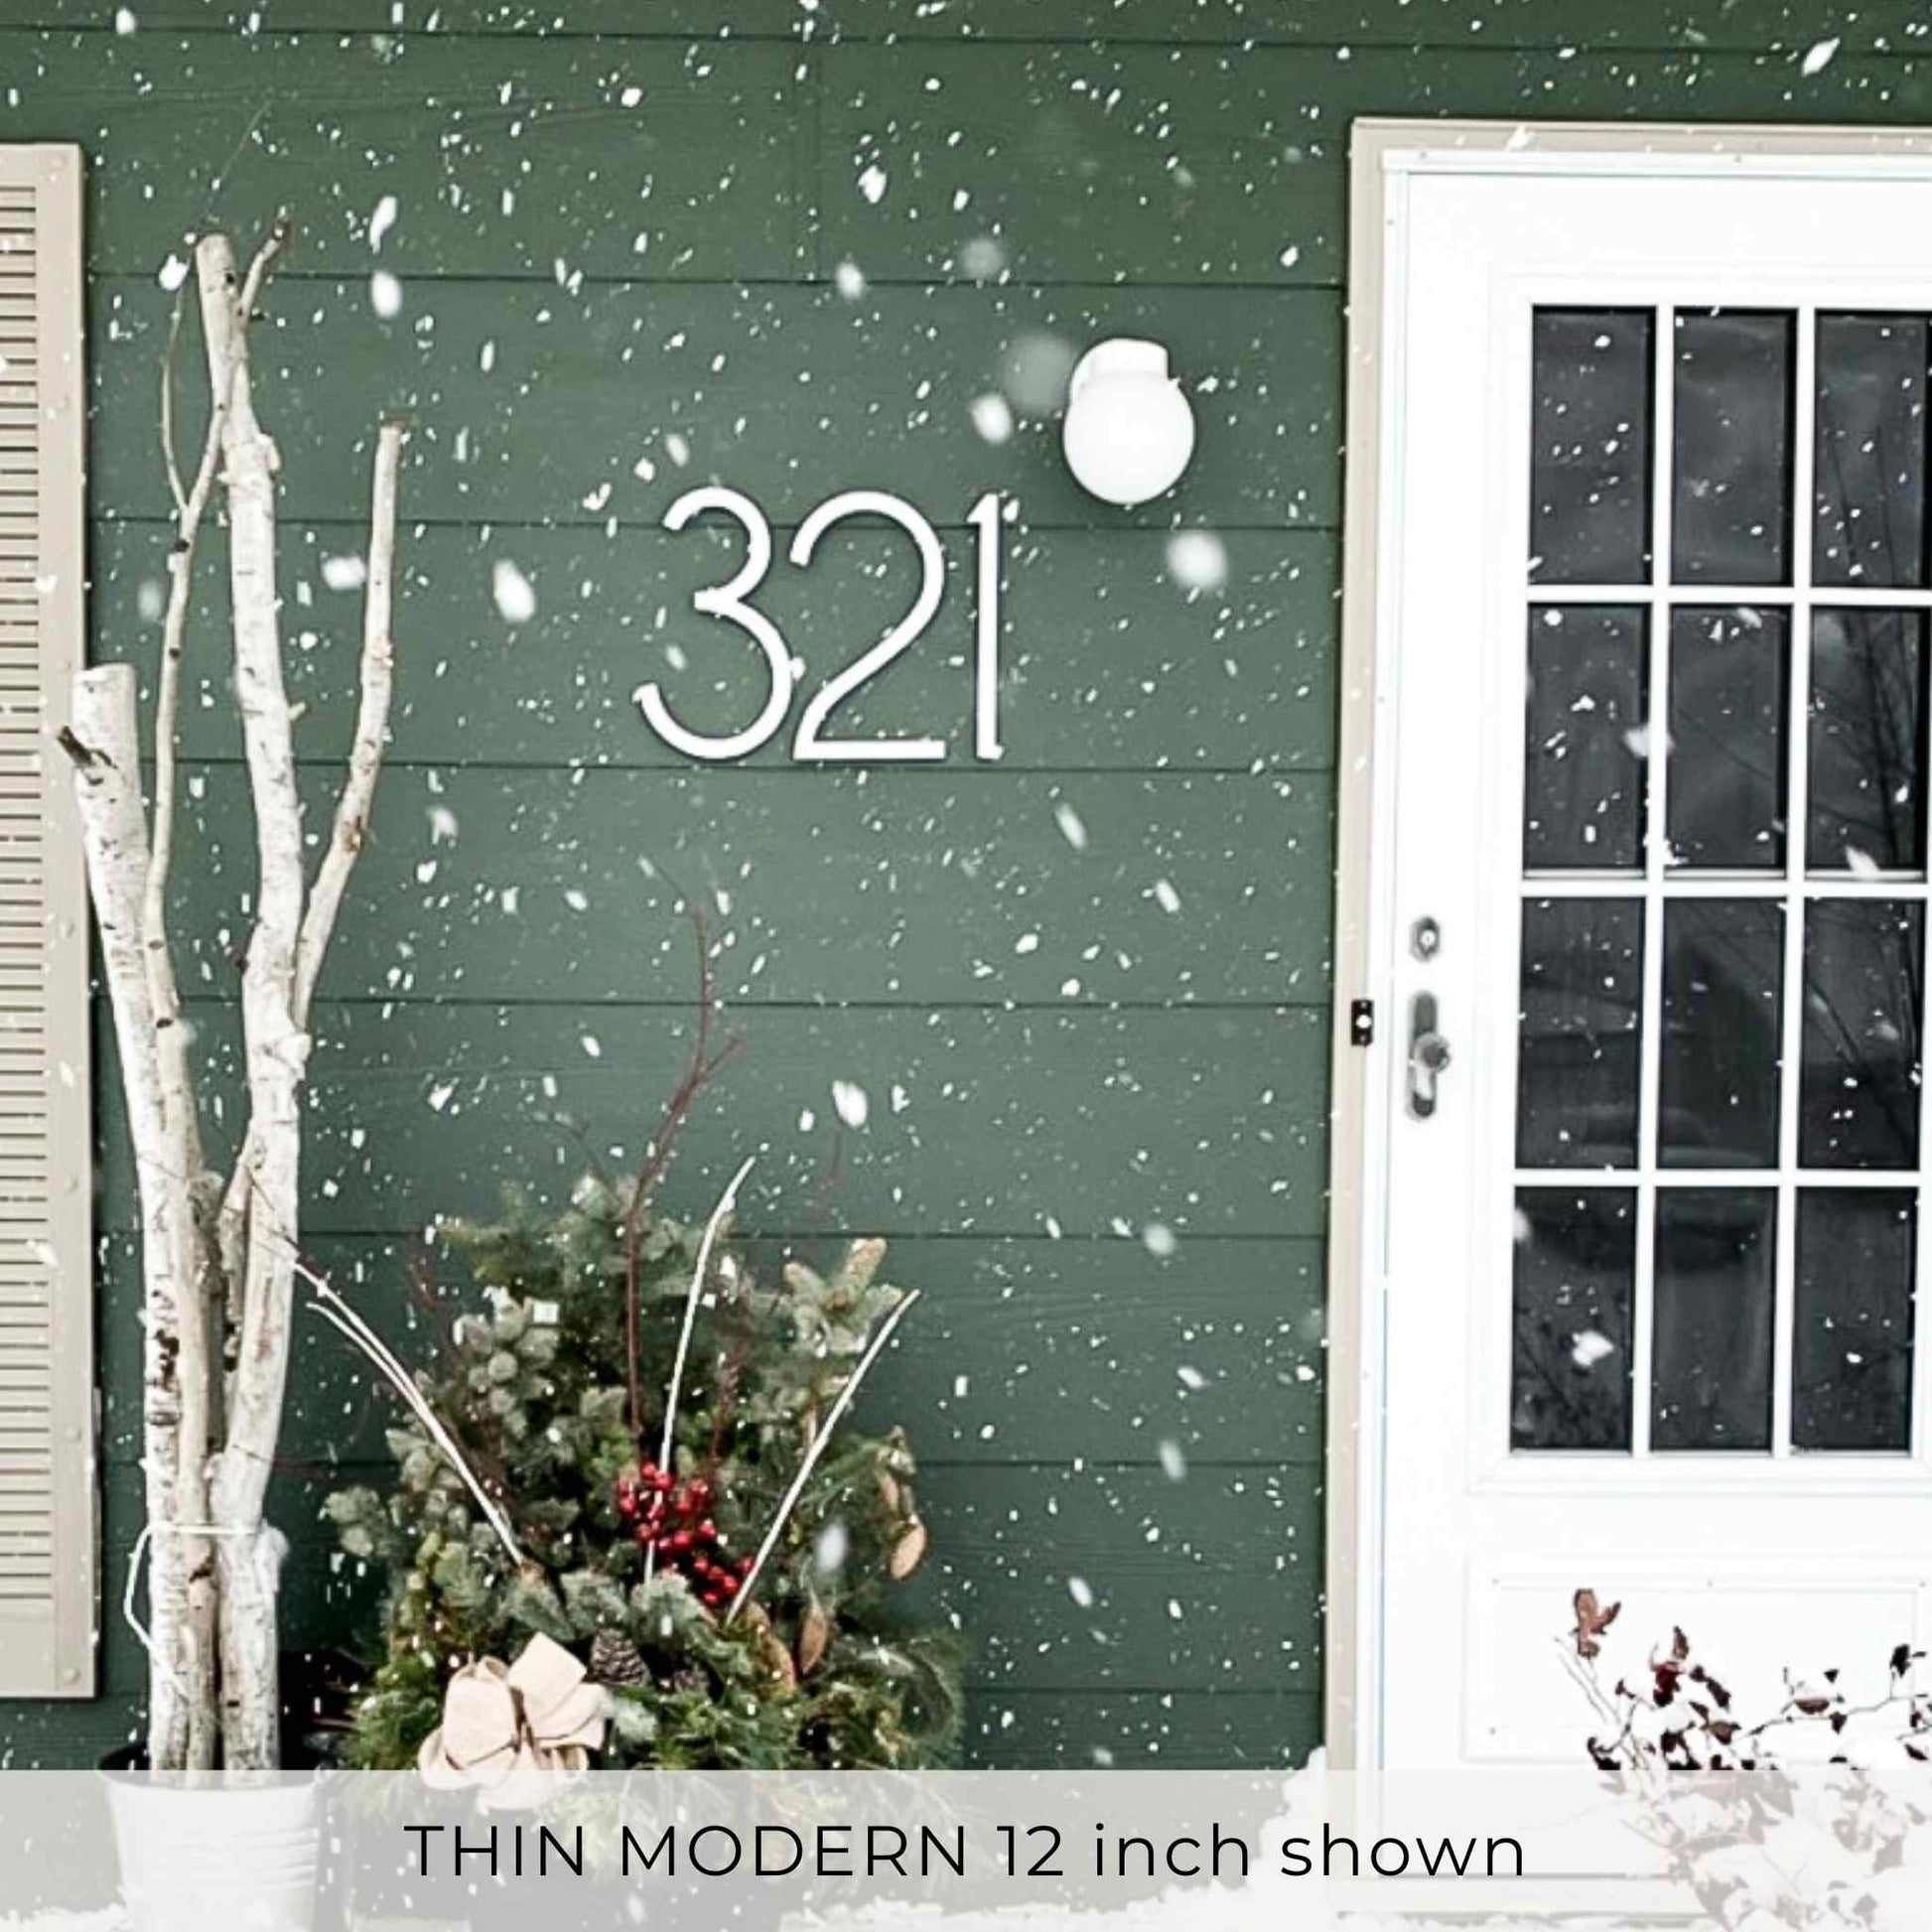 THIN MODERN white house numbers and letters on dark siding